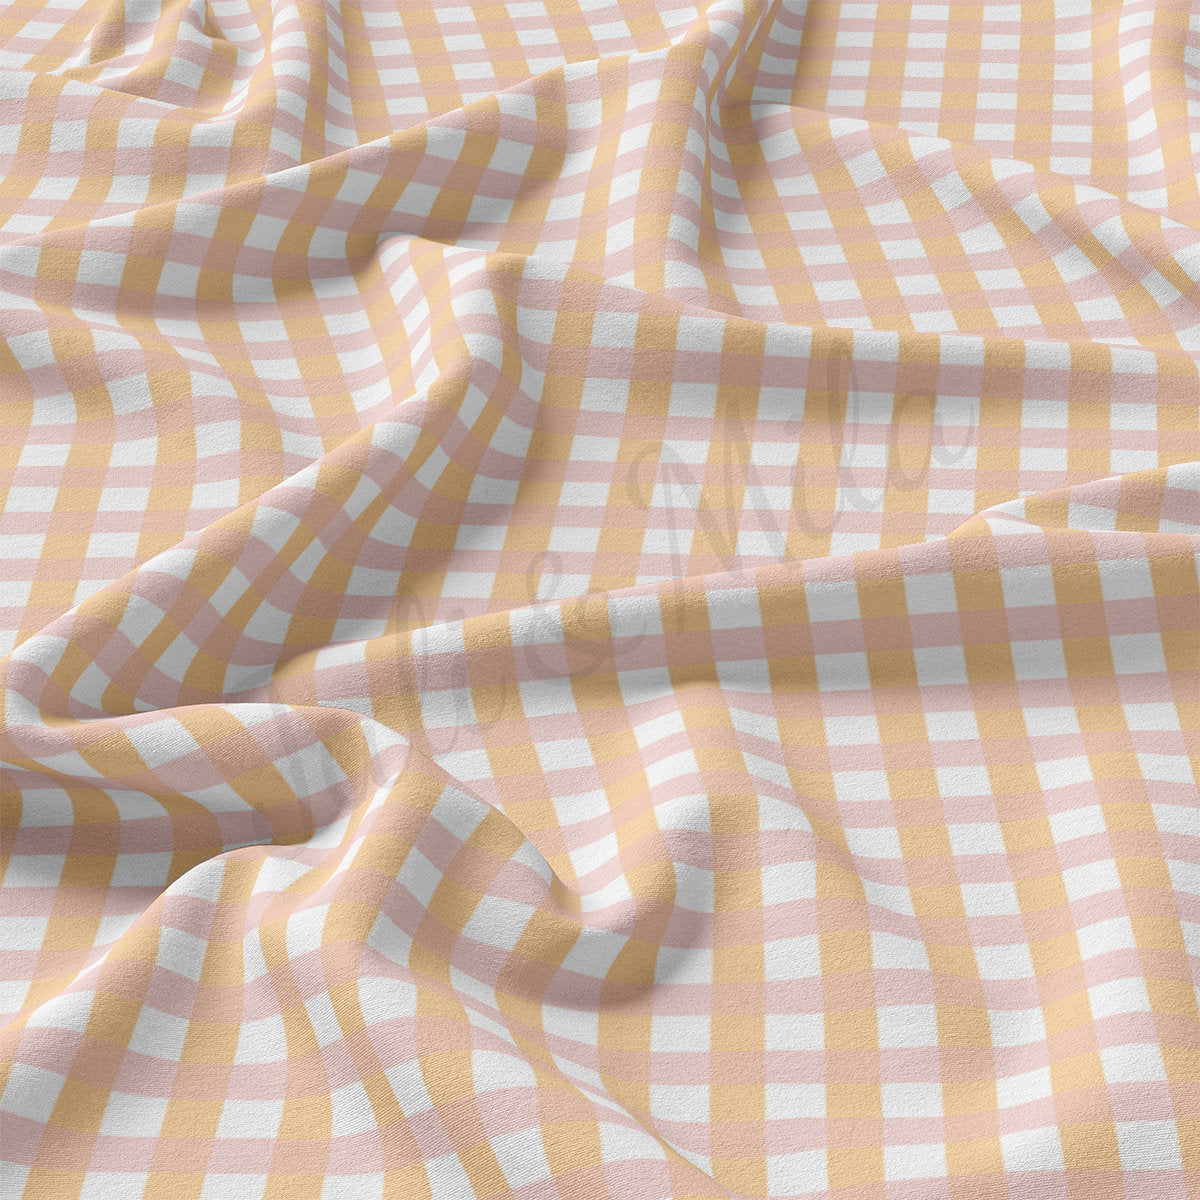 DBP Fabric Double Brushed Polyester Fabric DBP2286 Gingham